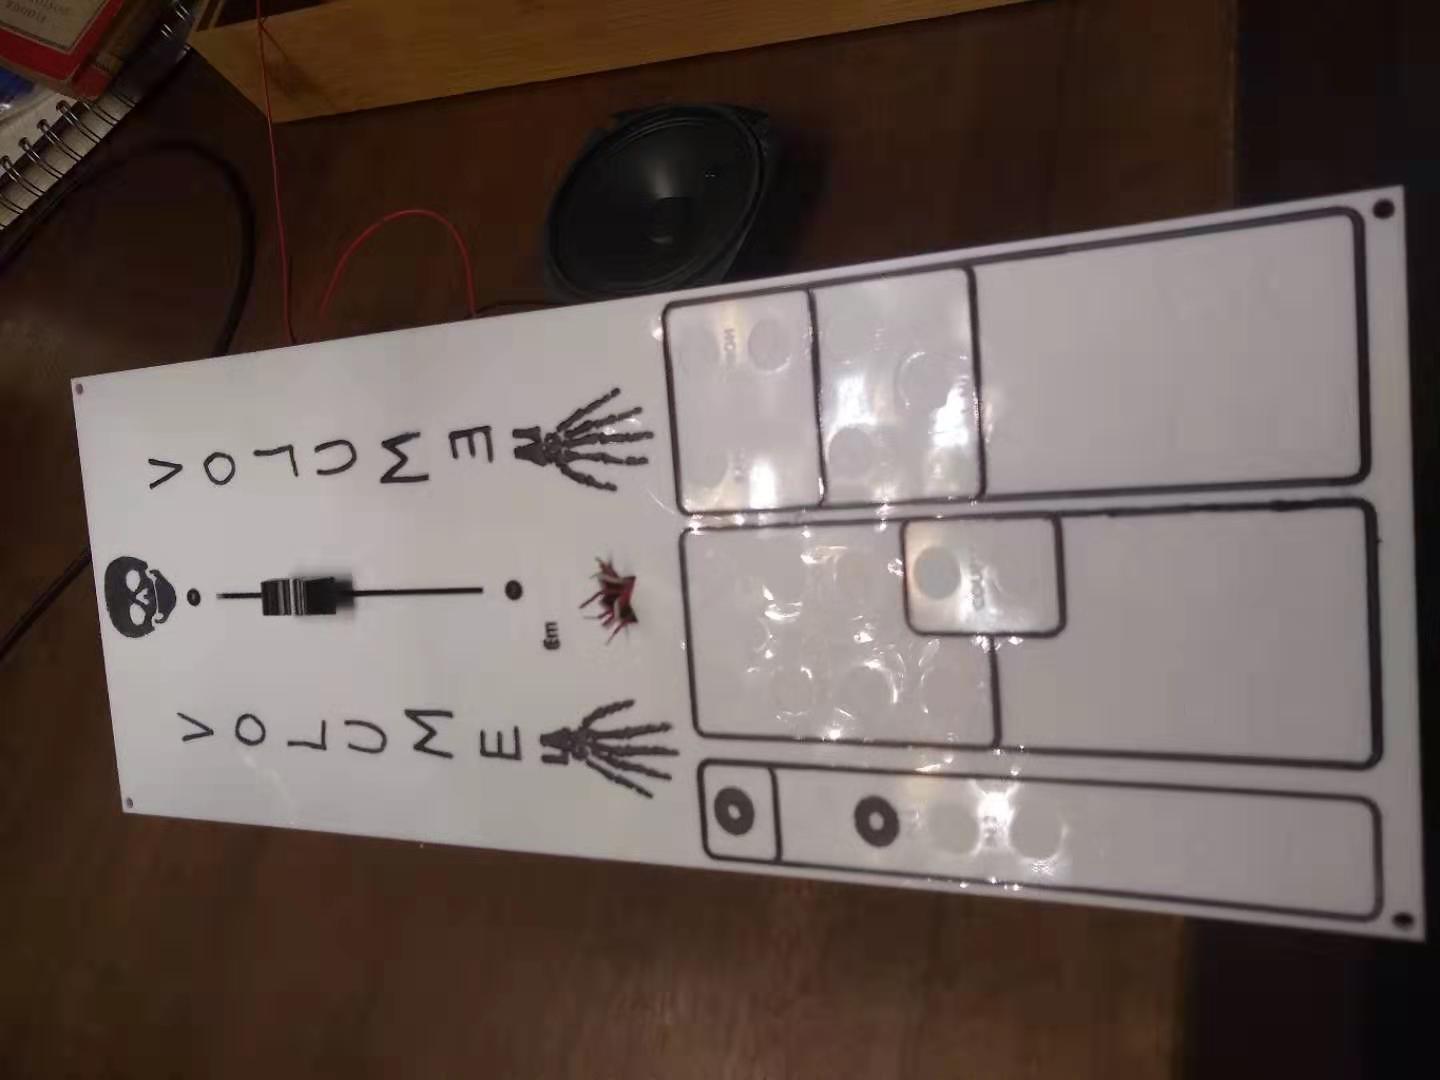 A prototype for my control panel.